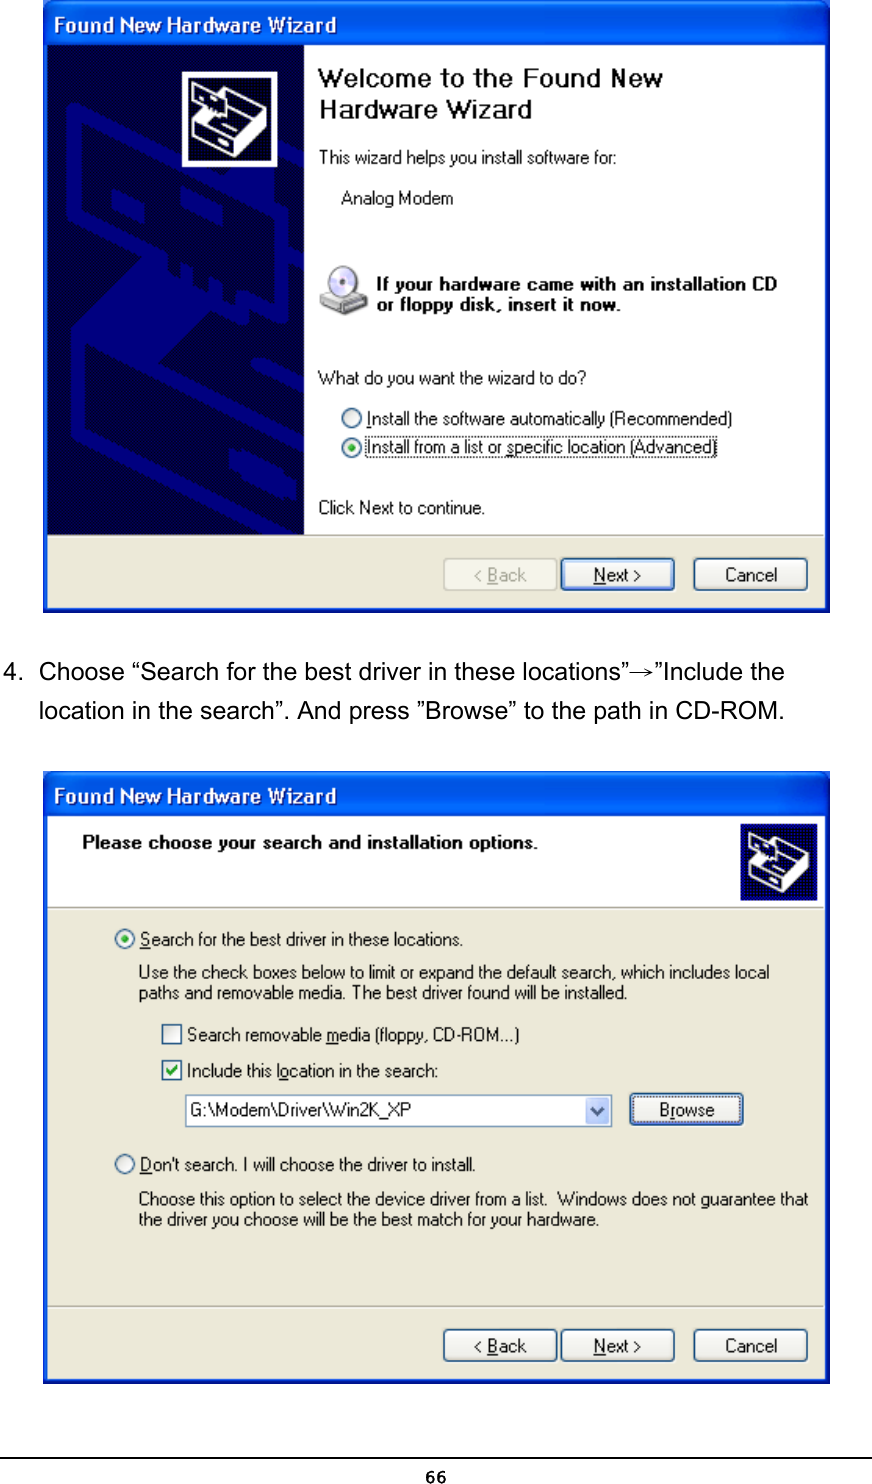   66 4.  Choose “Search for the best driver in these locations”→”Include the location in the search”. And press ”Browse” to the path in CD-ROM.  